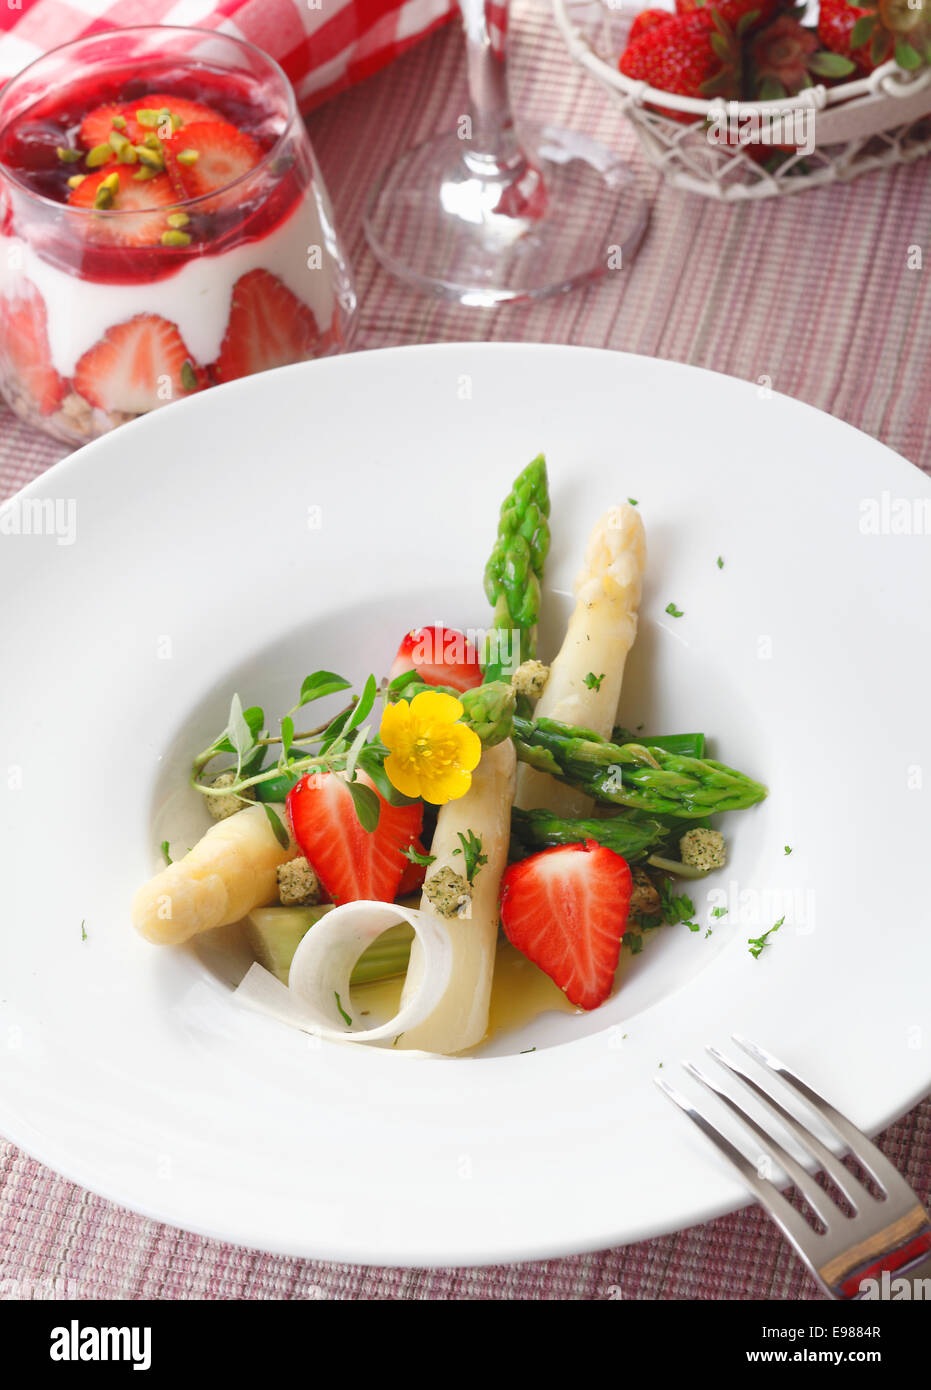 Salad of freshly diced asparagus tips and strawberries served in a plain white dish. High angled view. Stock Photo